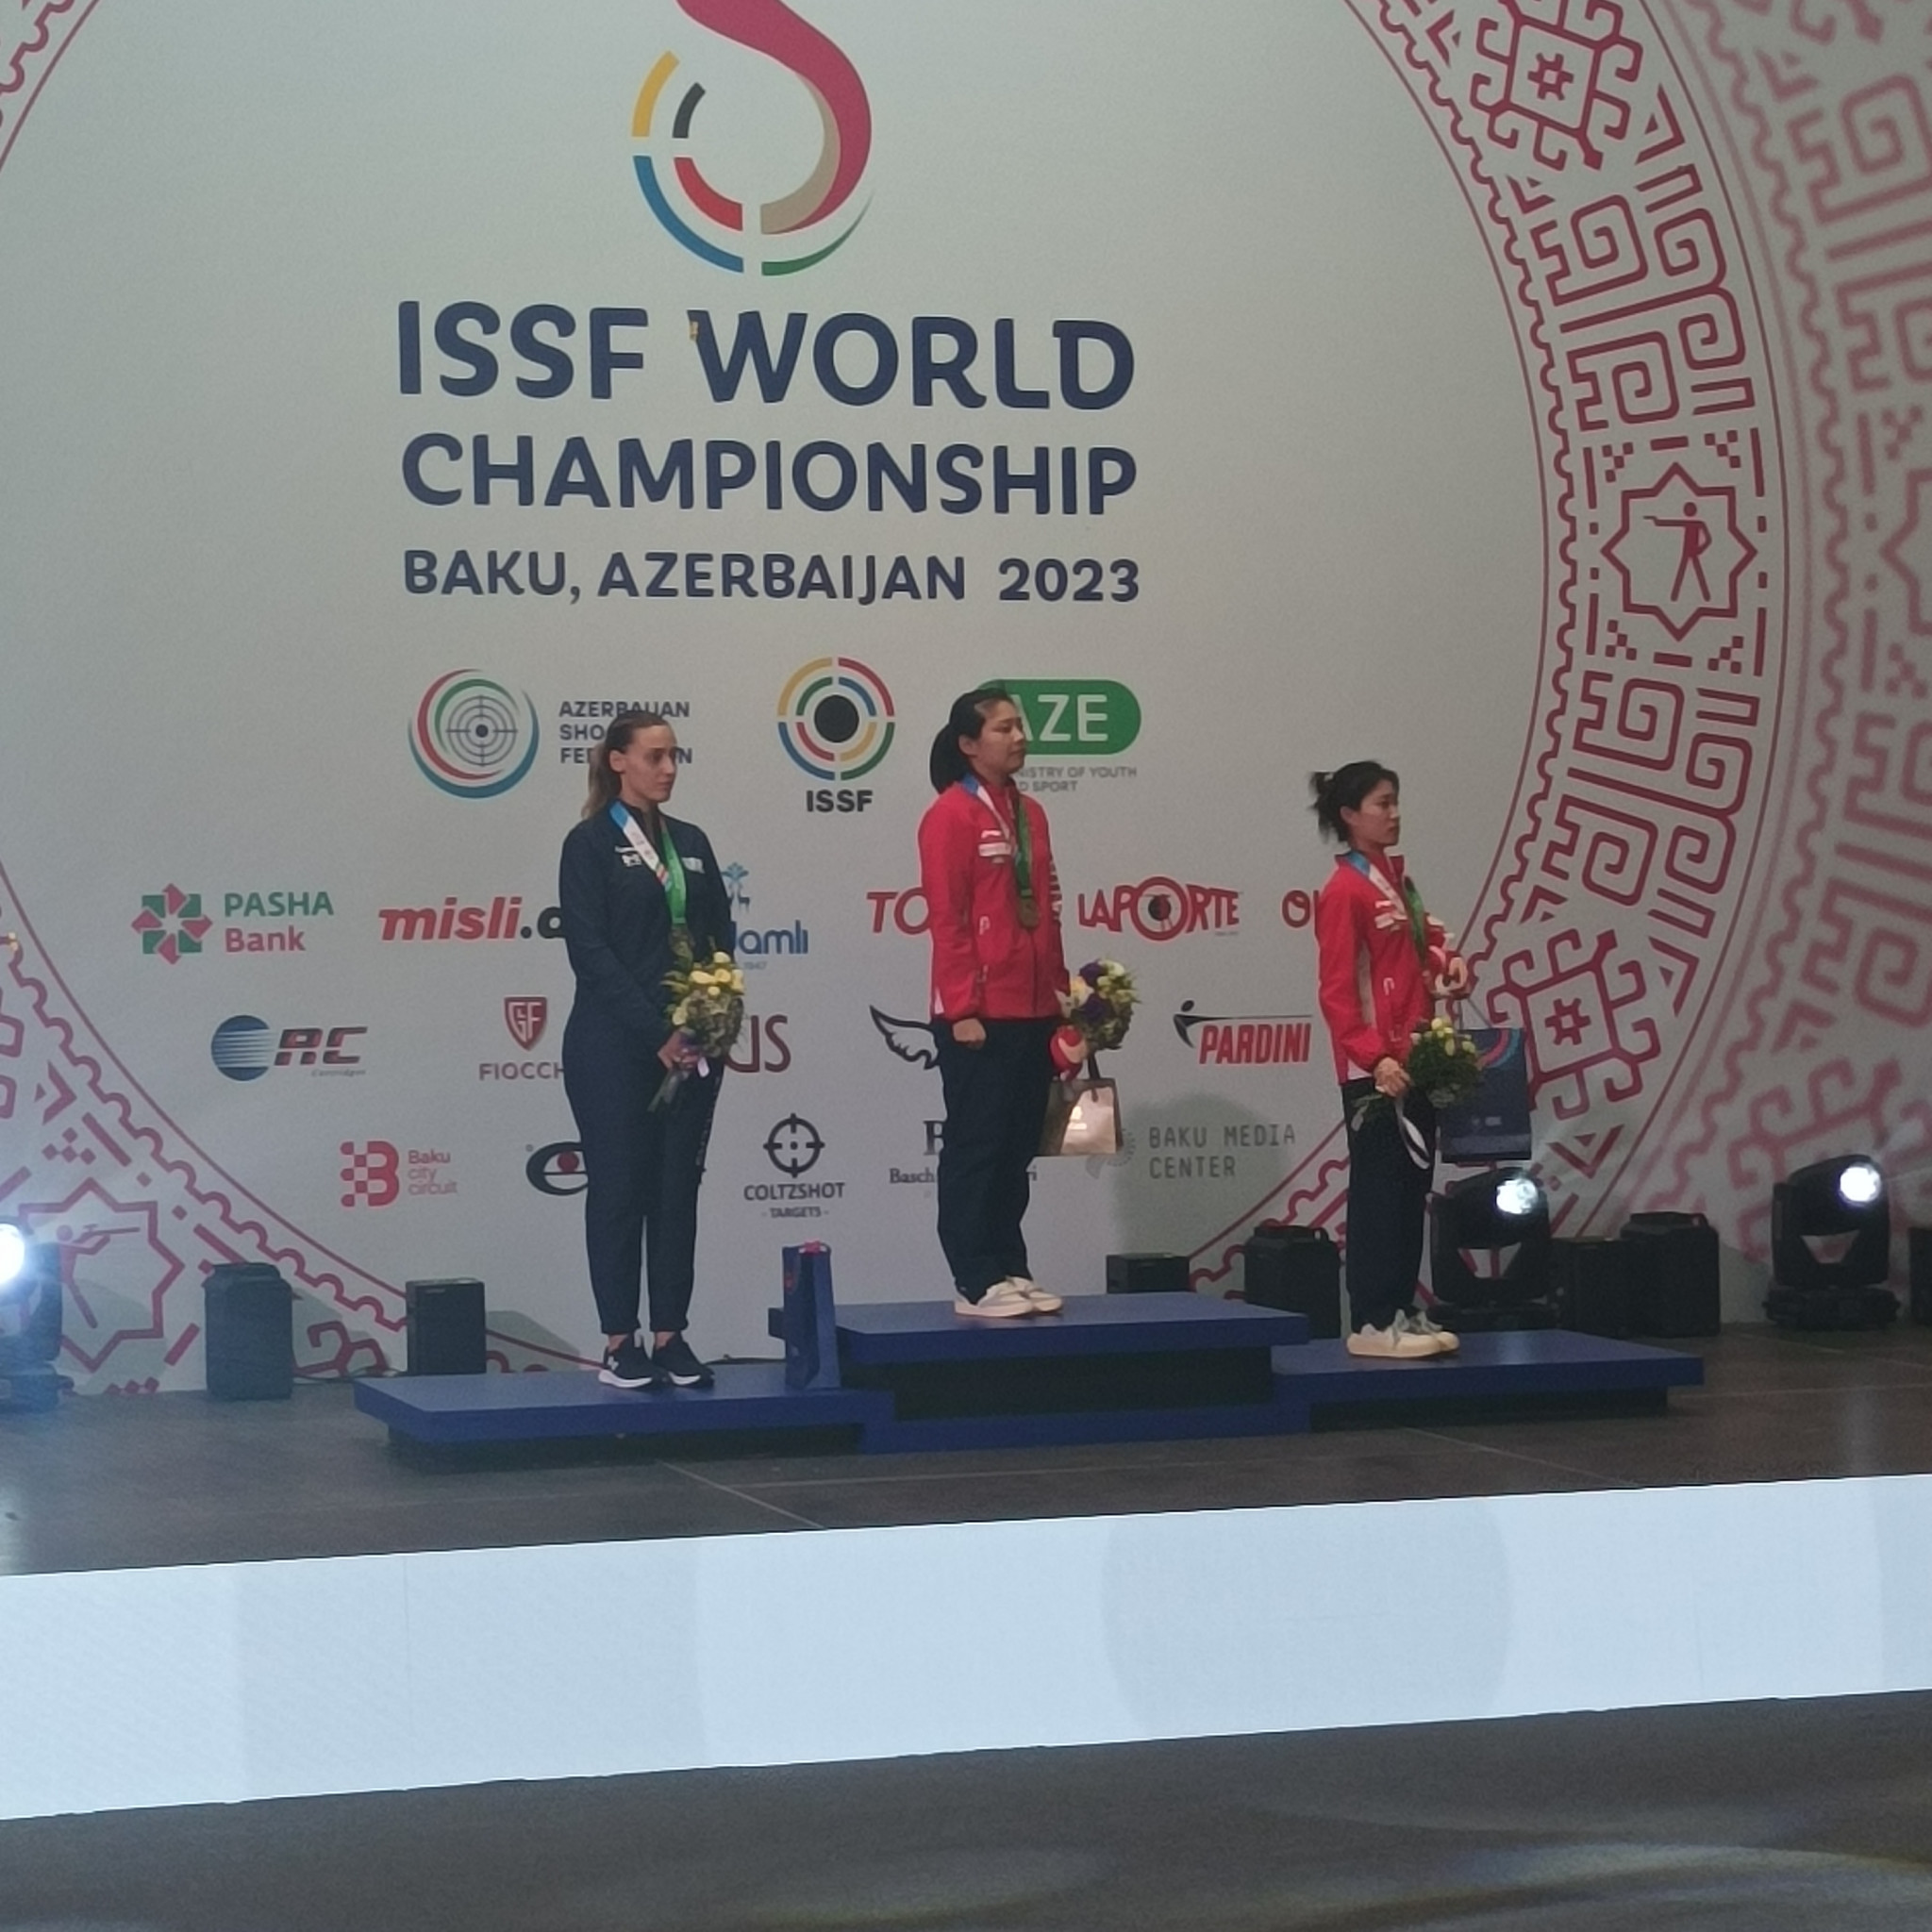 China's Jiang Ranxin won the women's 10m air pistol to complete a successful first day of competition at the ISSF World Championships ©ITG